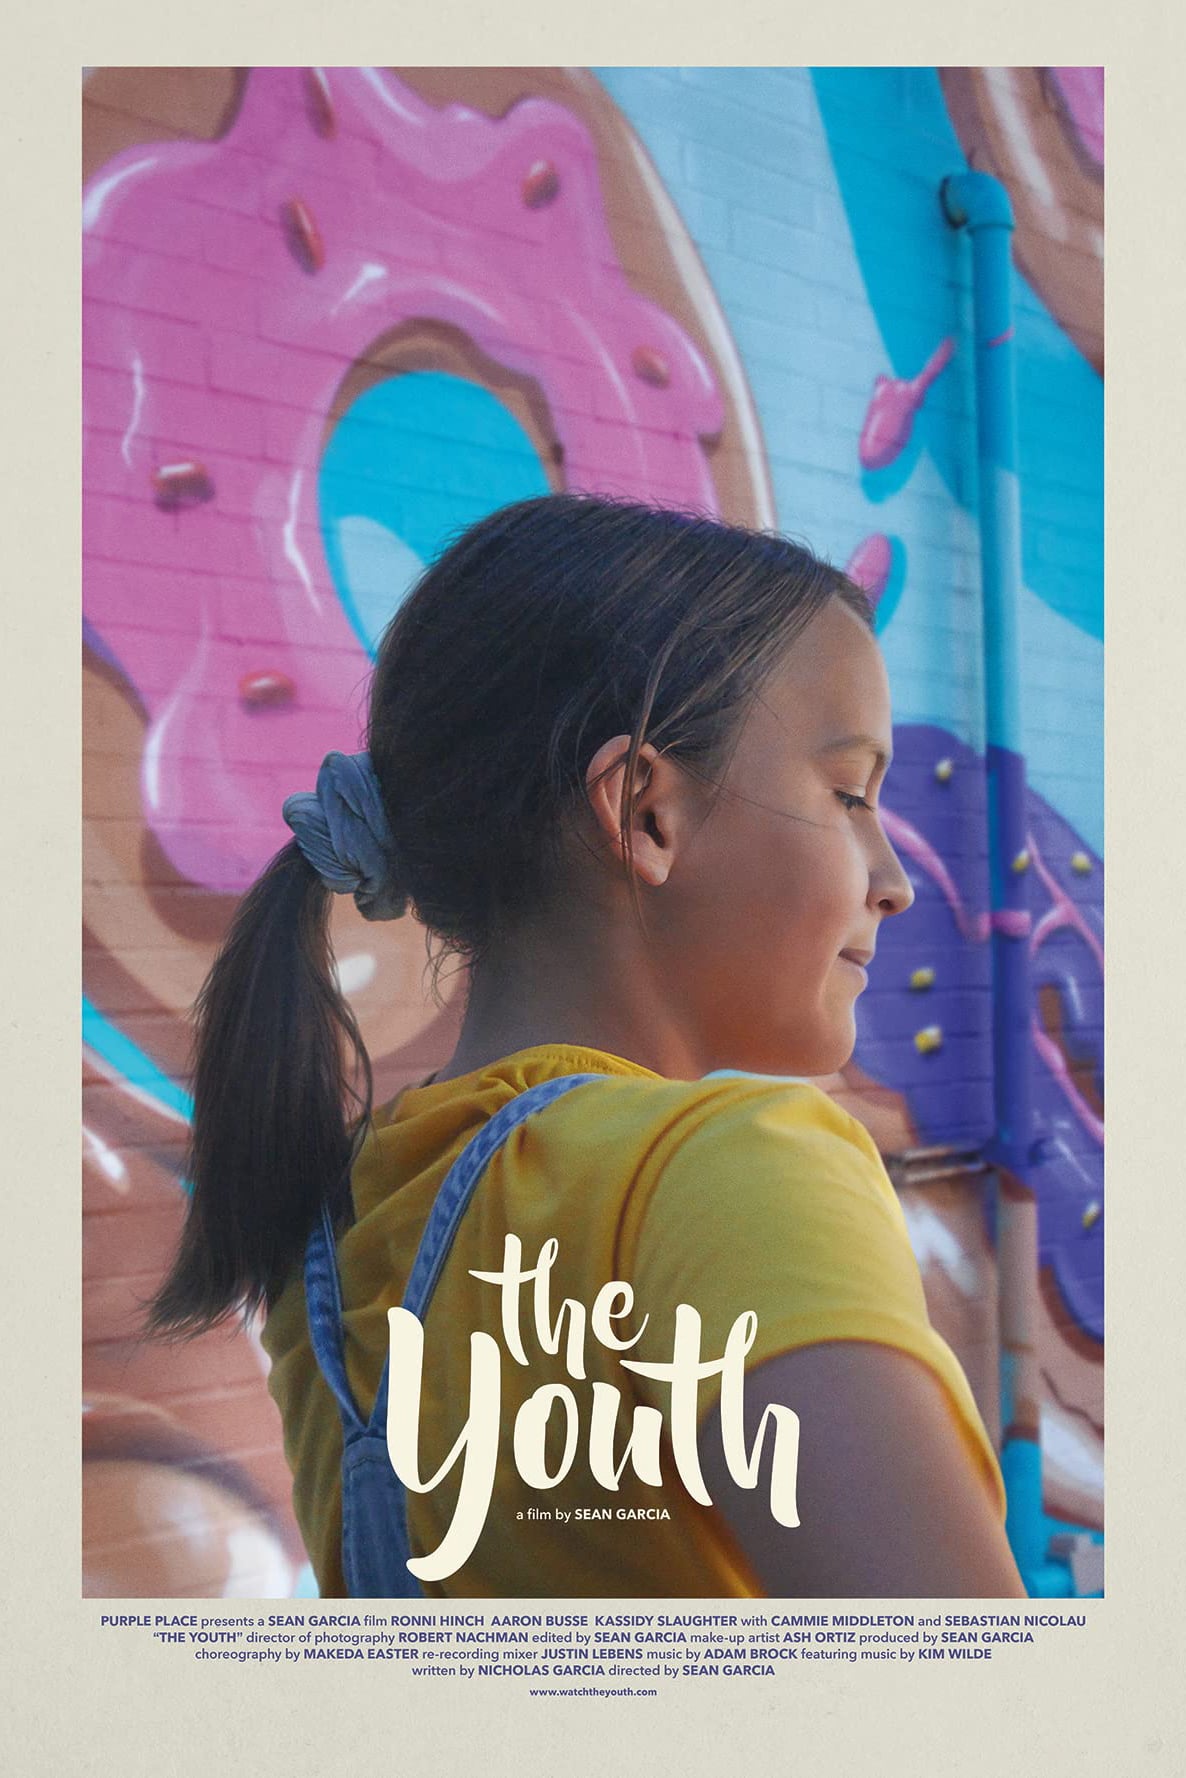 The Youth